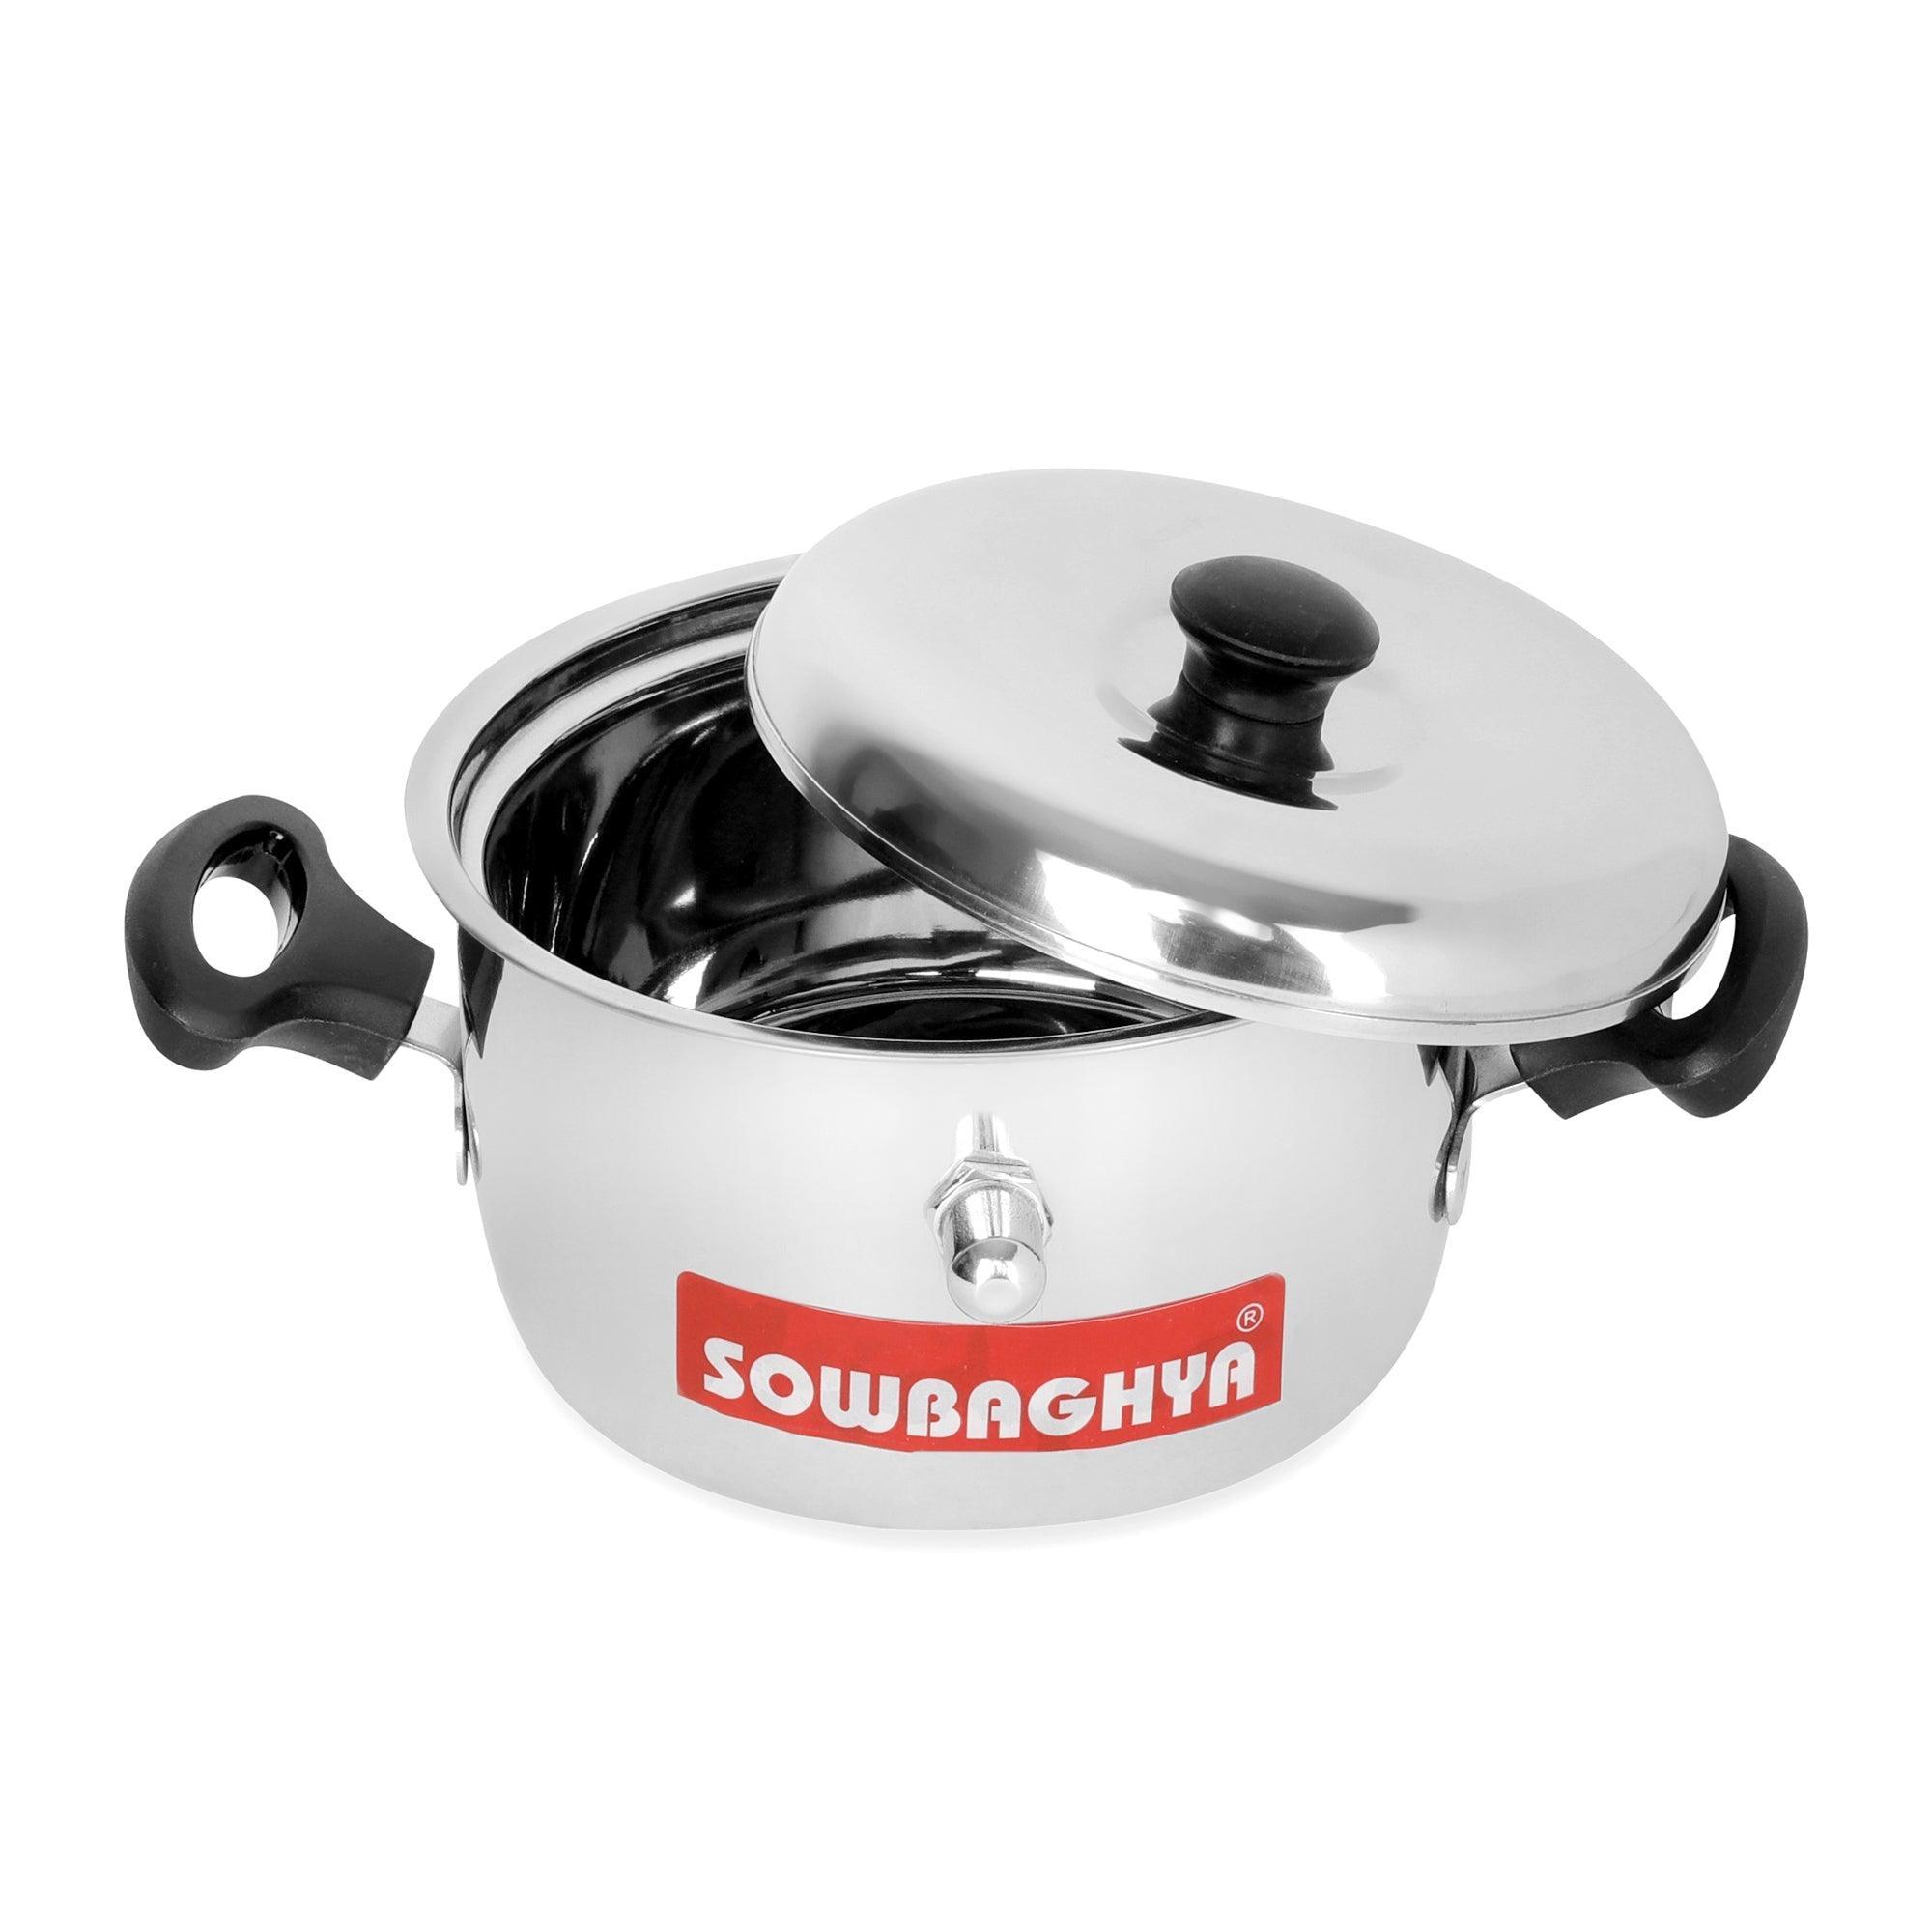 Ultima IB Stainless Steel Milk Cooker 1 Ltr - SOWBAGHYA